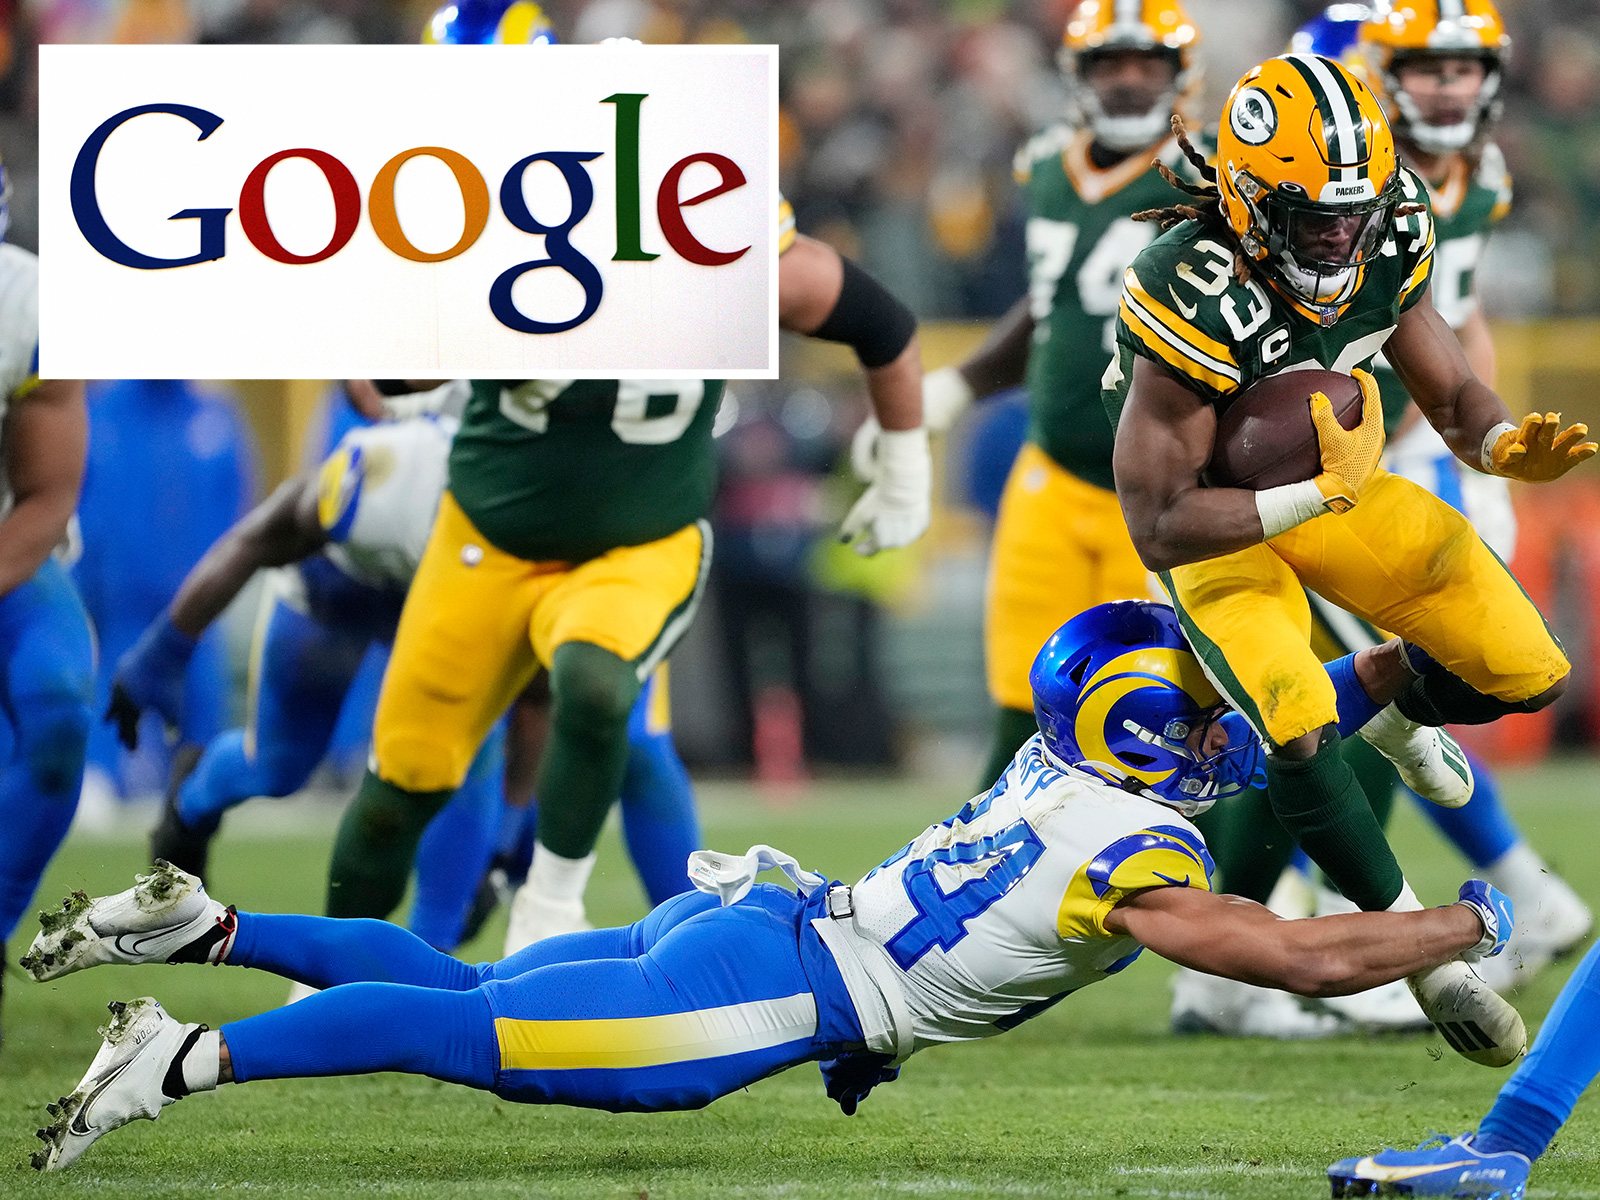 NFL Sunday Ticket What Is It, How to Watch, Cost, More After Google Deal